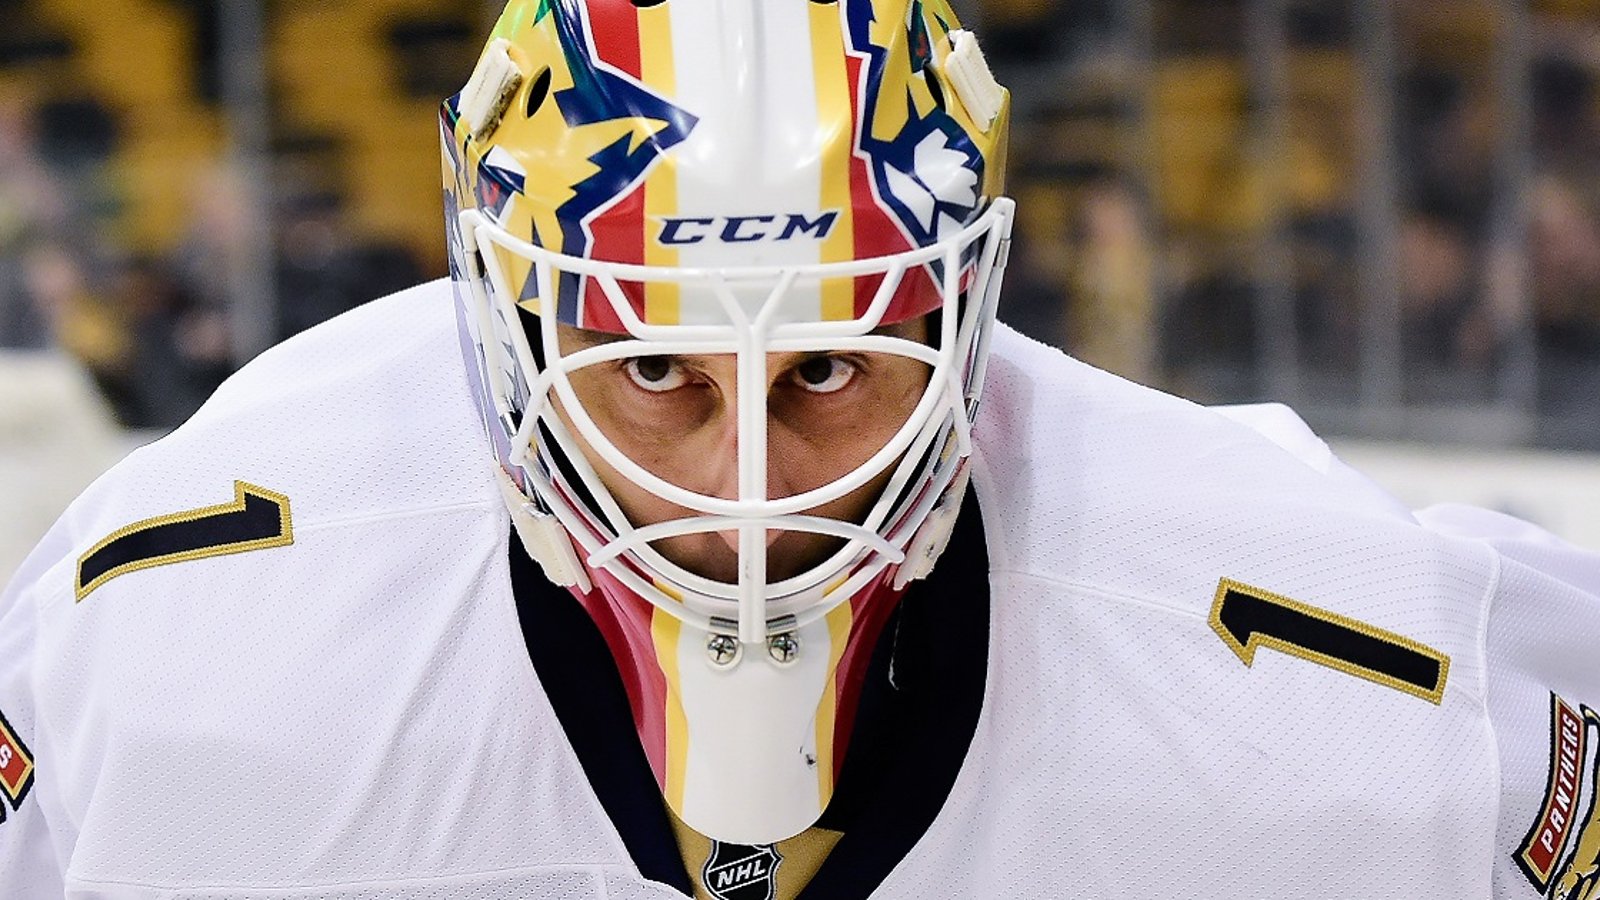 Breaking: Roberto Luongo takes a shot at his own team!